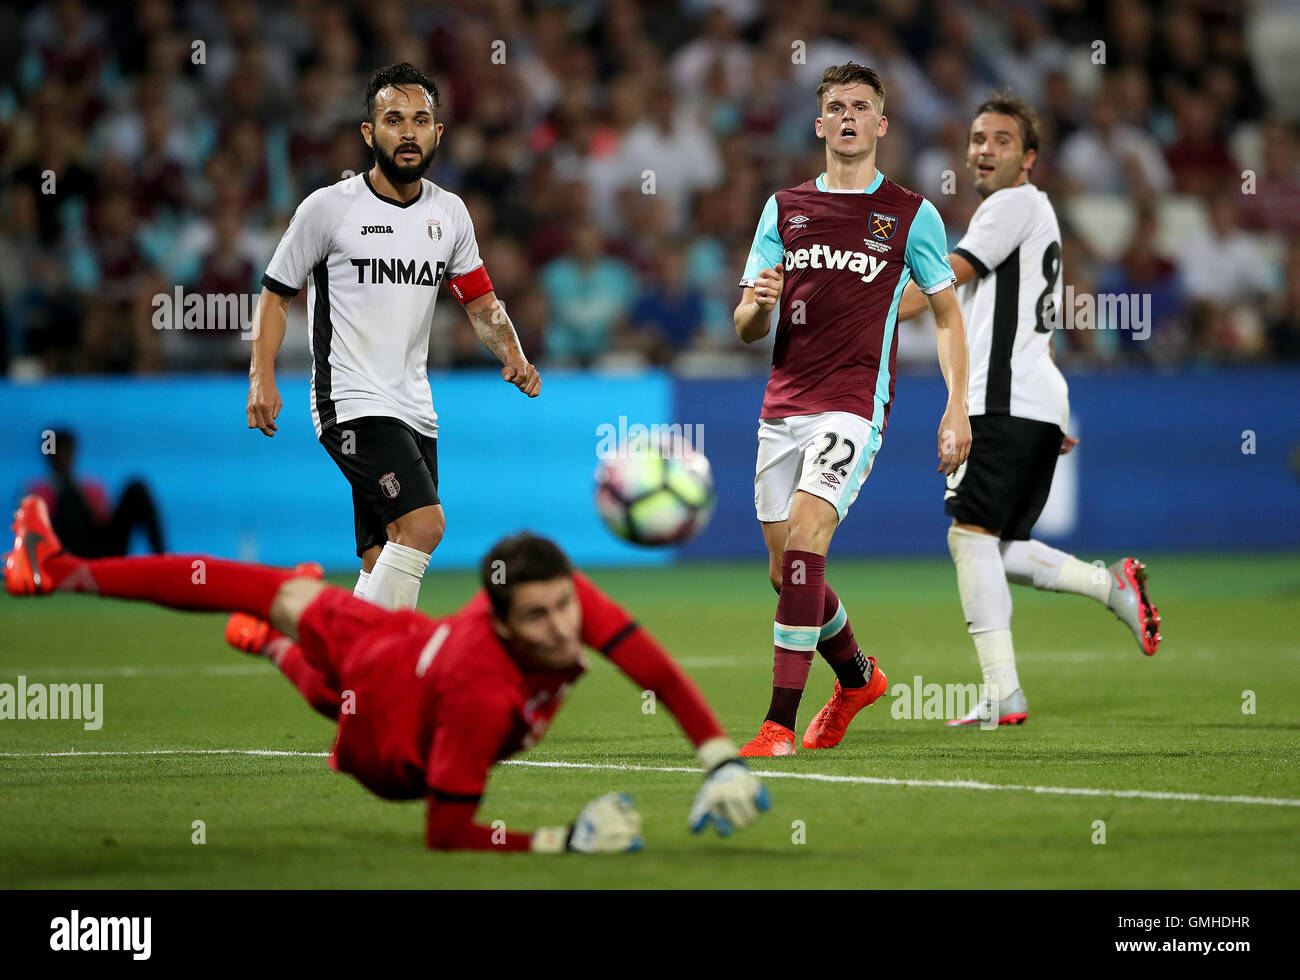 West Ham United's Sam Byram (second right) sees his attempt on goal go wide during the UEFA Europa League - Play Off match at the London Stadium, London. Stock Photo